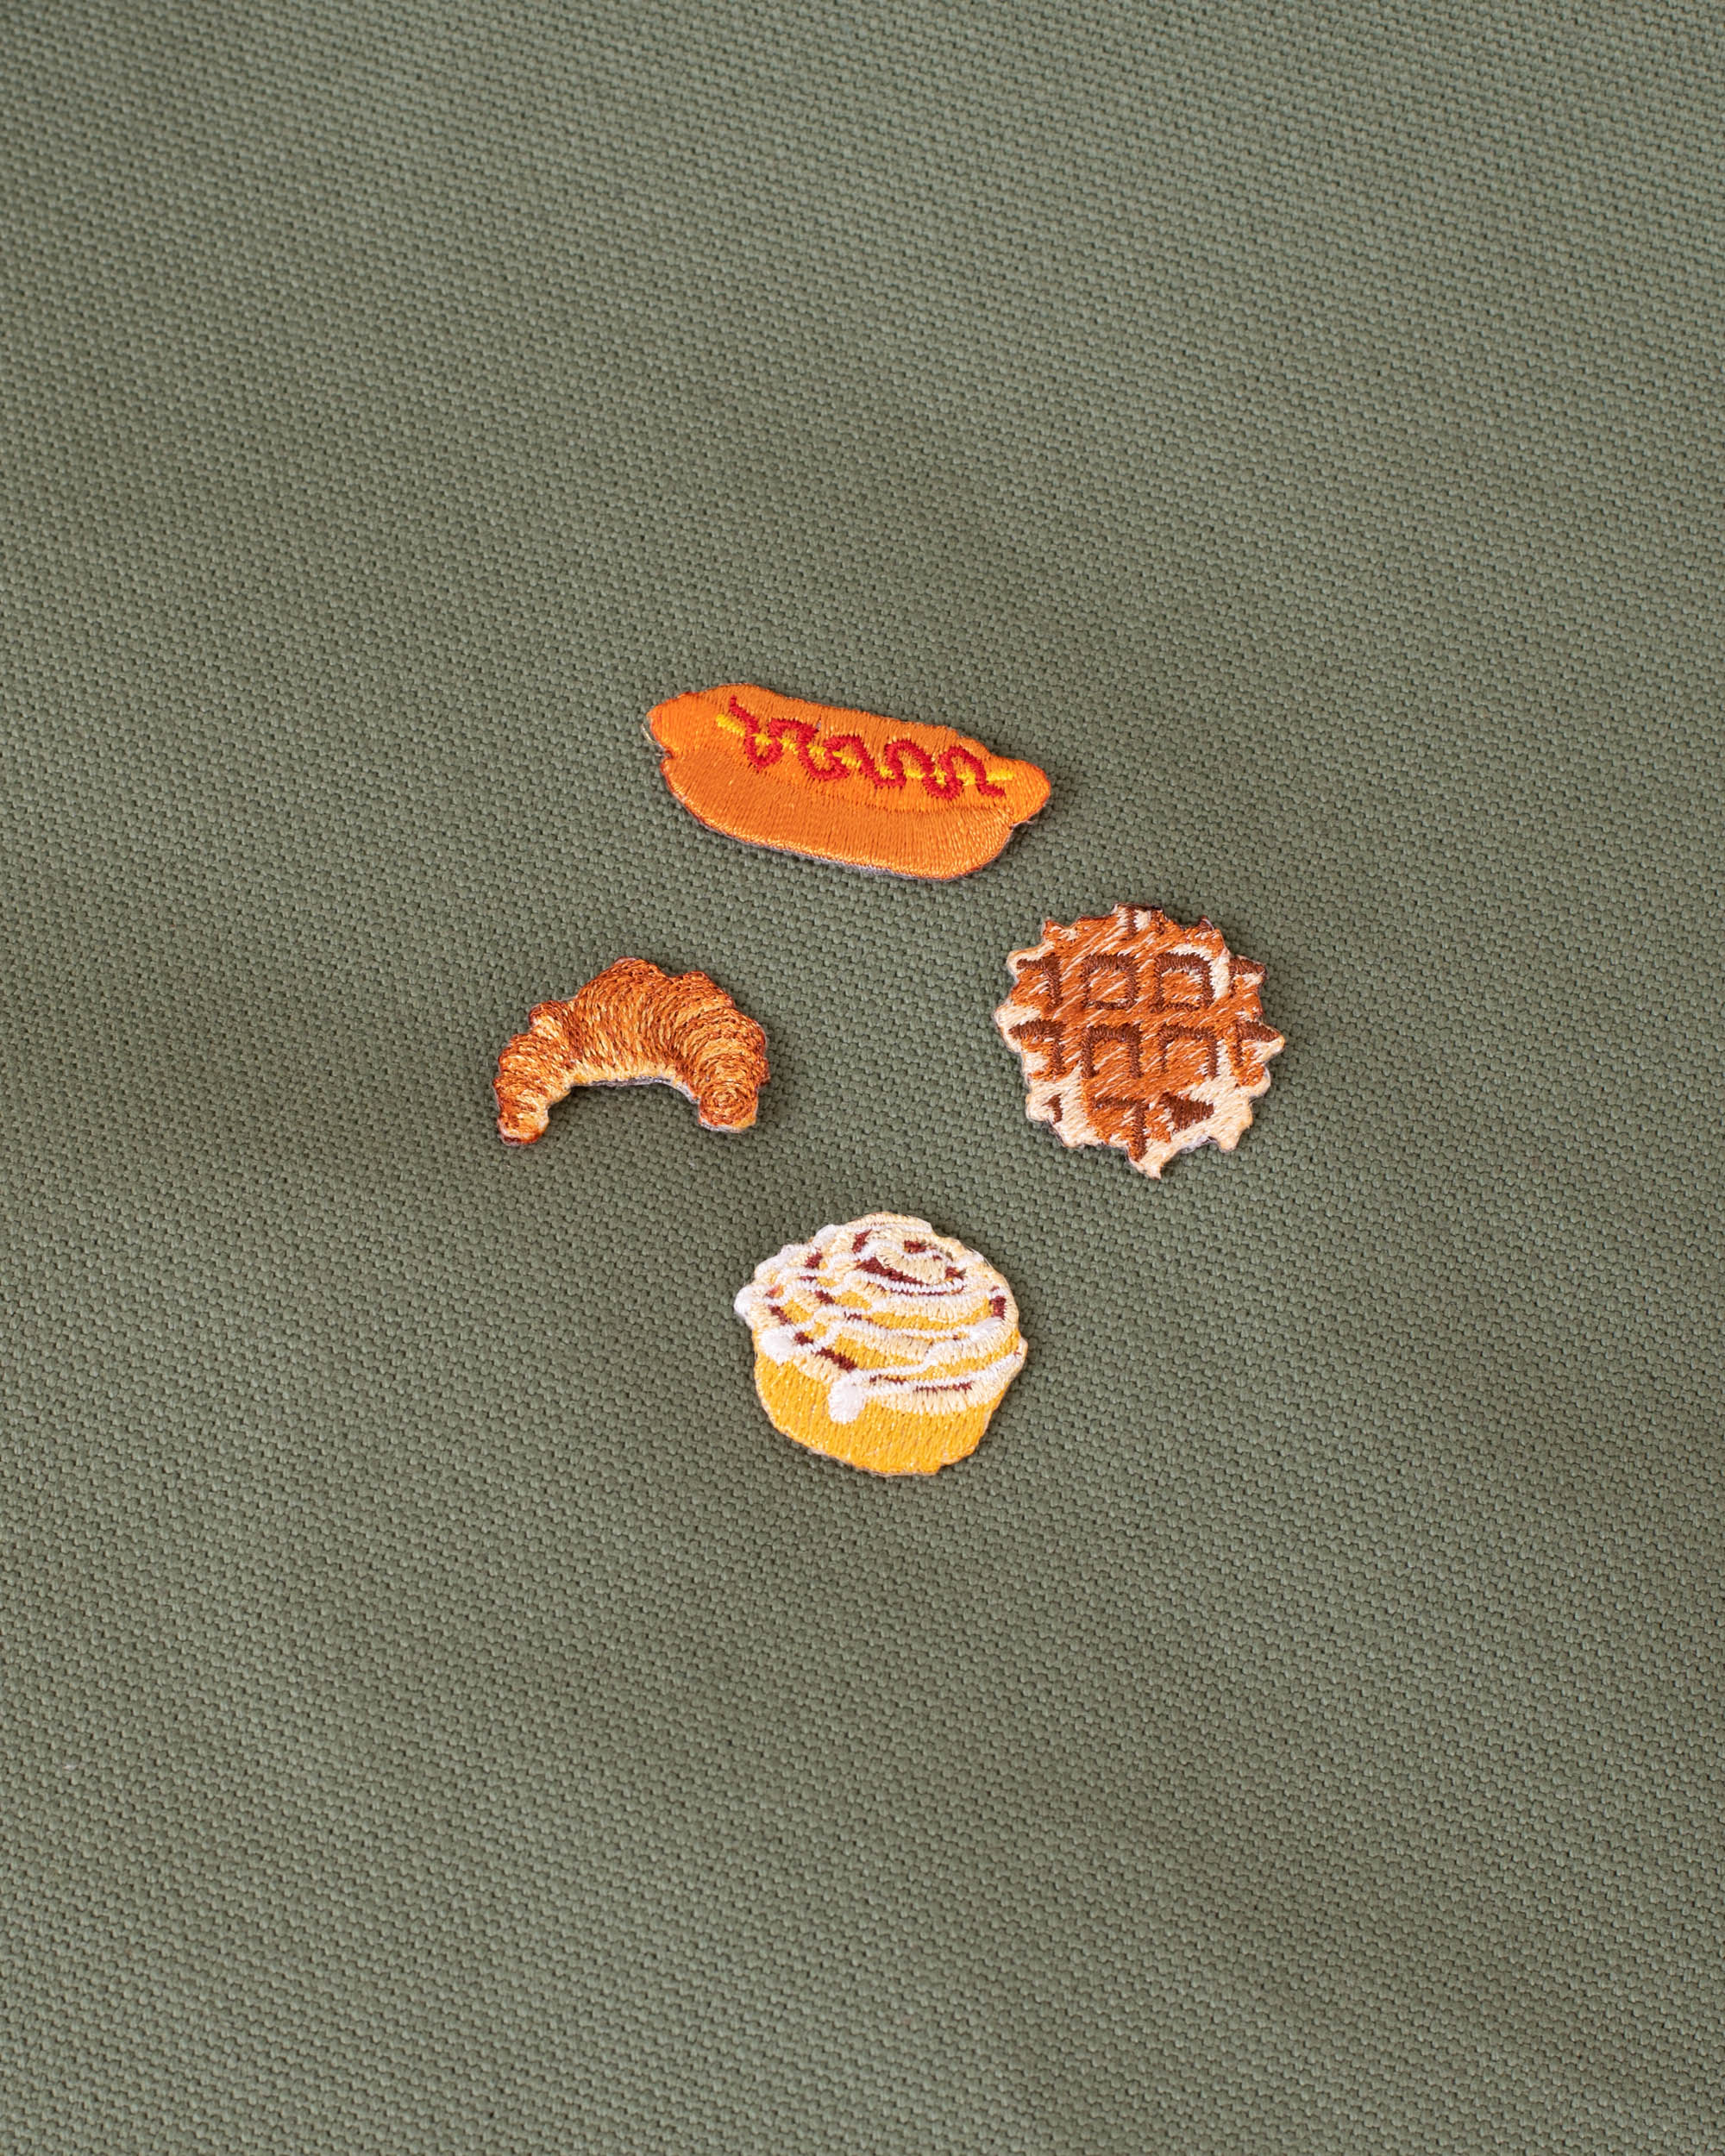 MINI PATCHES - 4 Breads